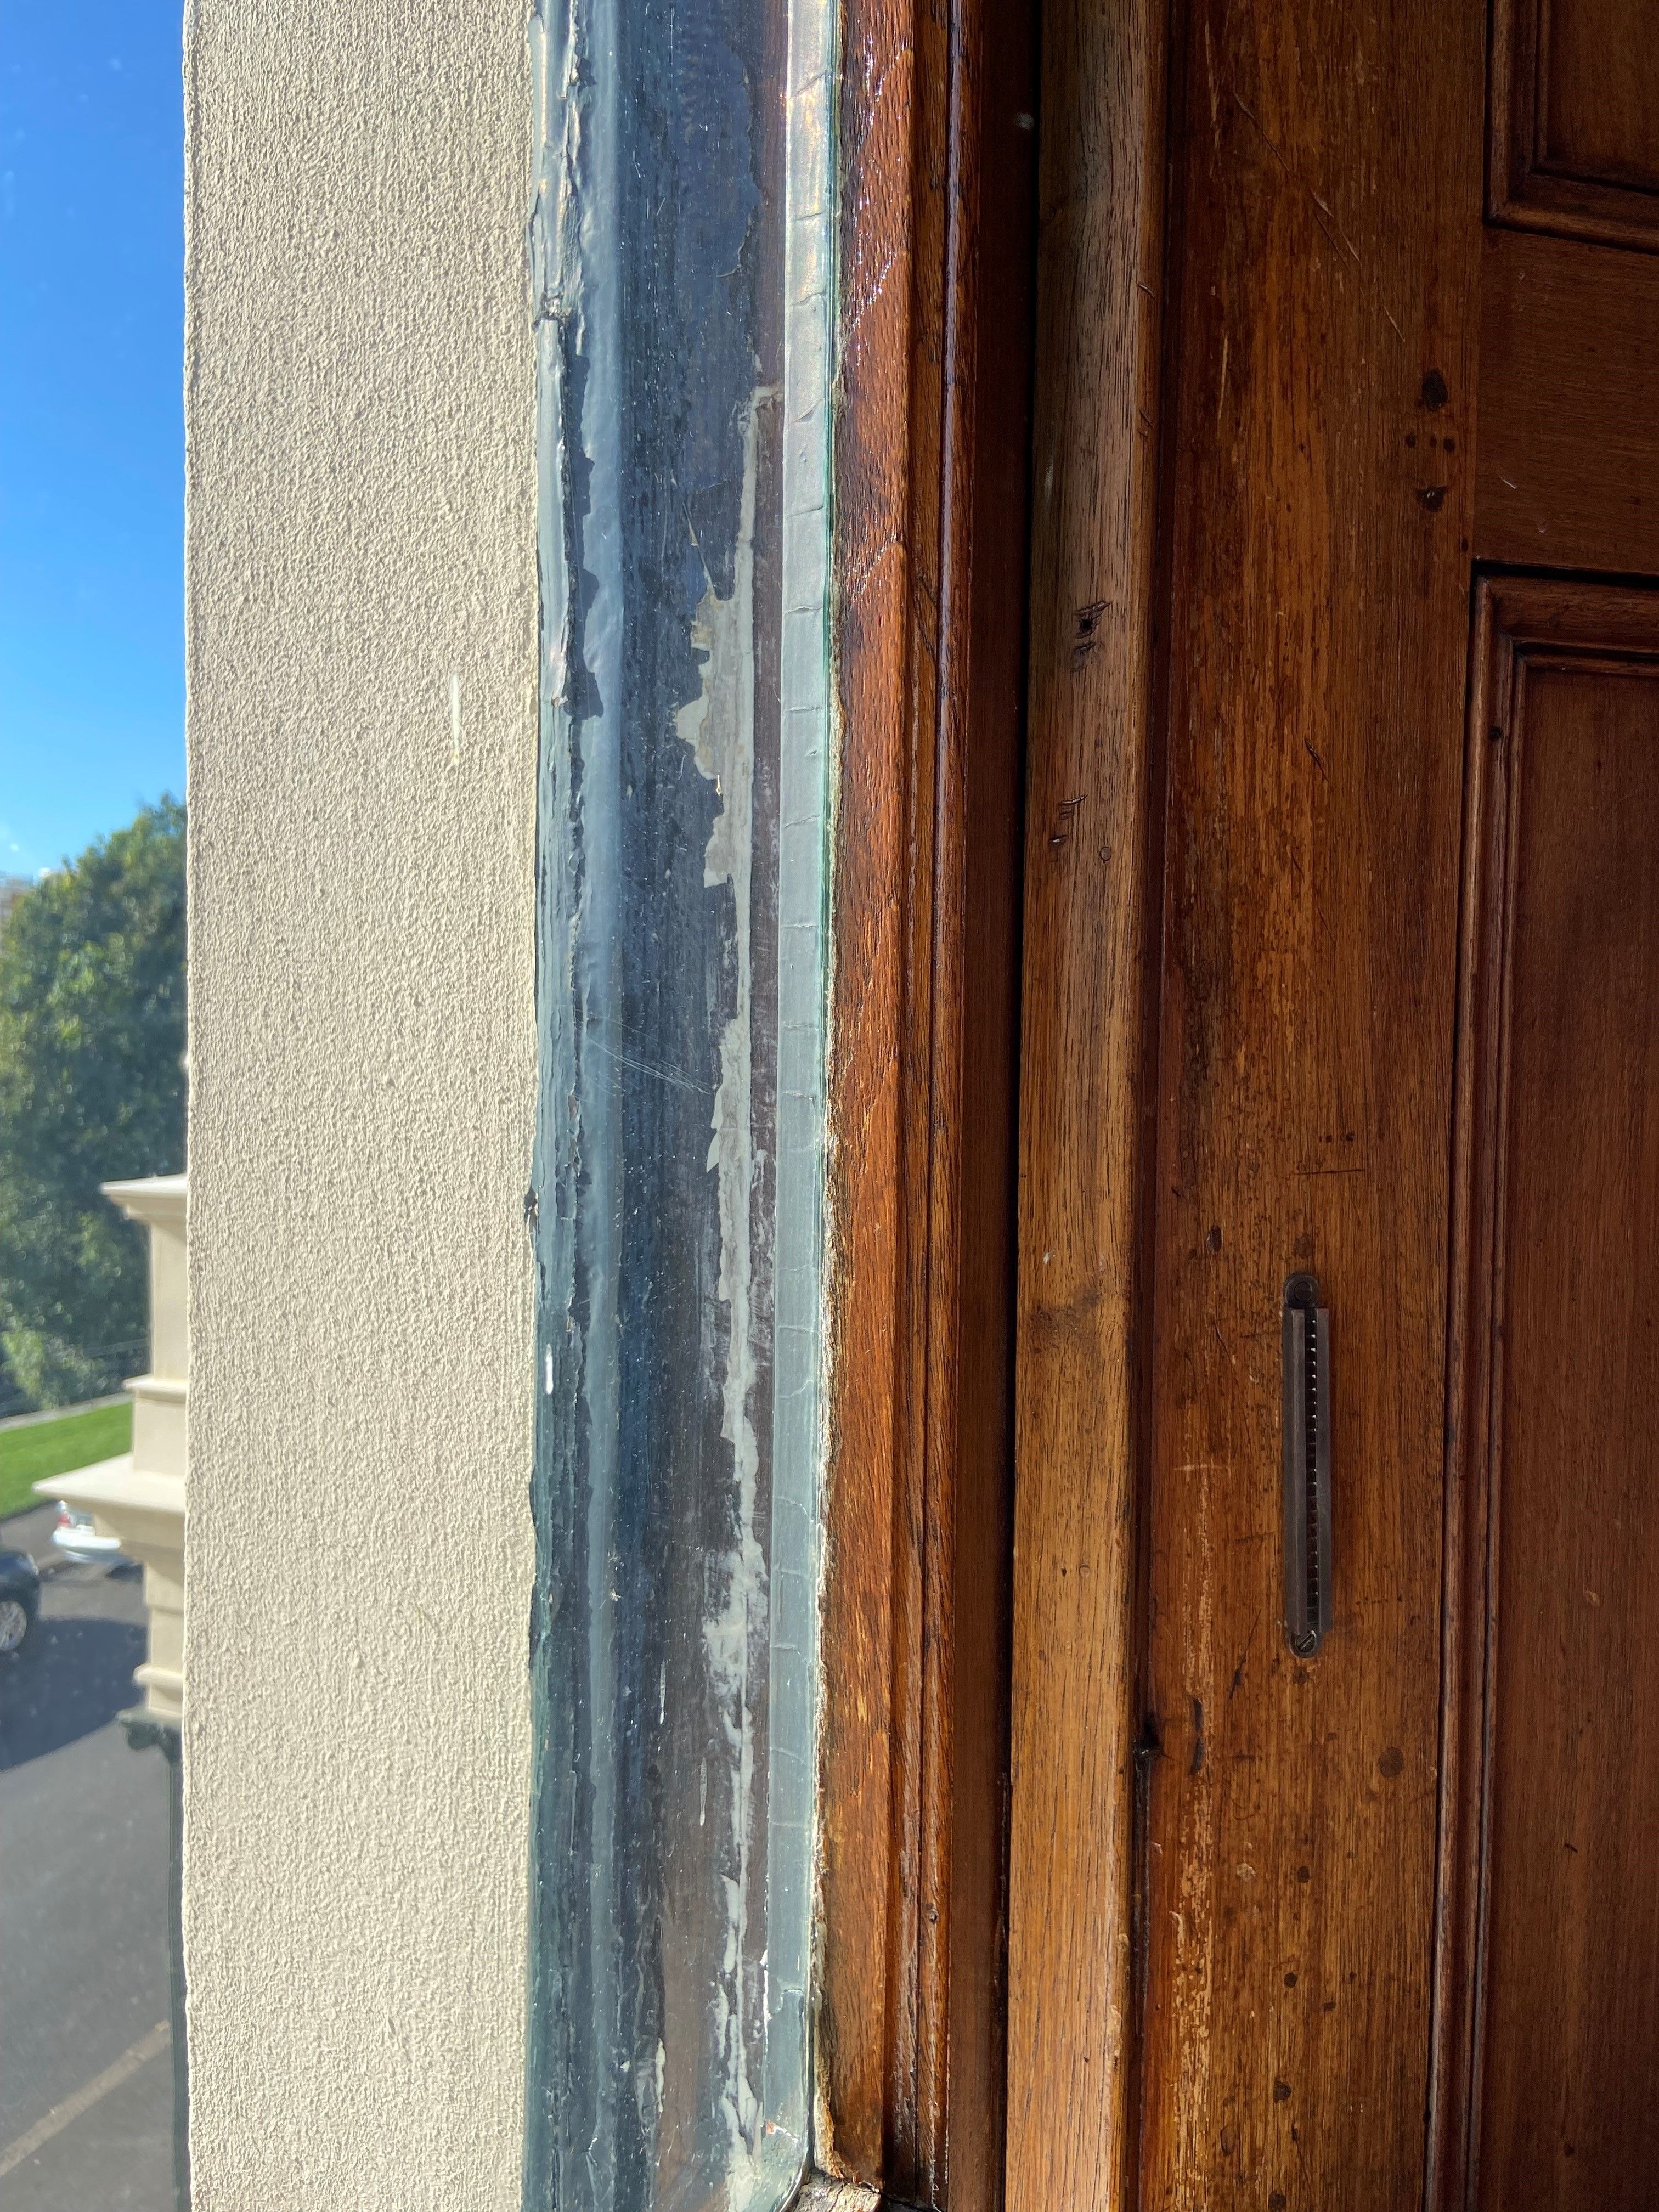 Deteriorated paint on the window frame at Elizabeth Bay House